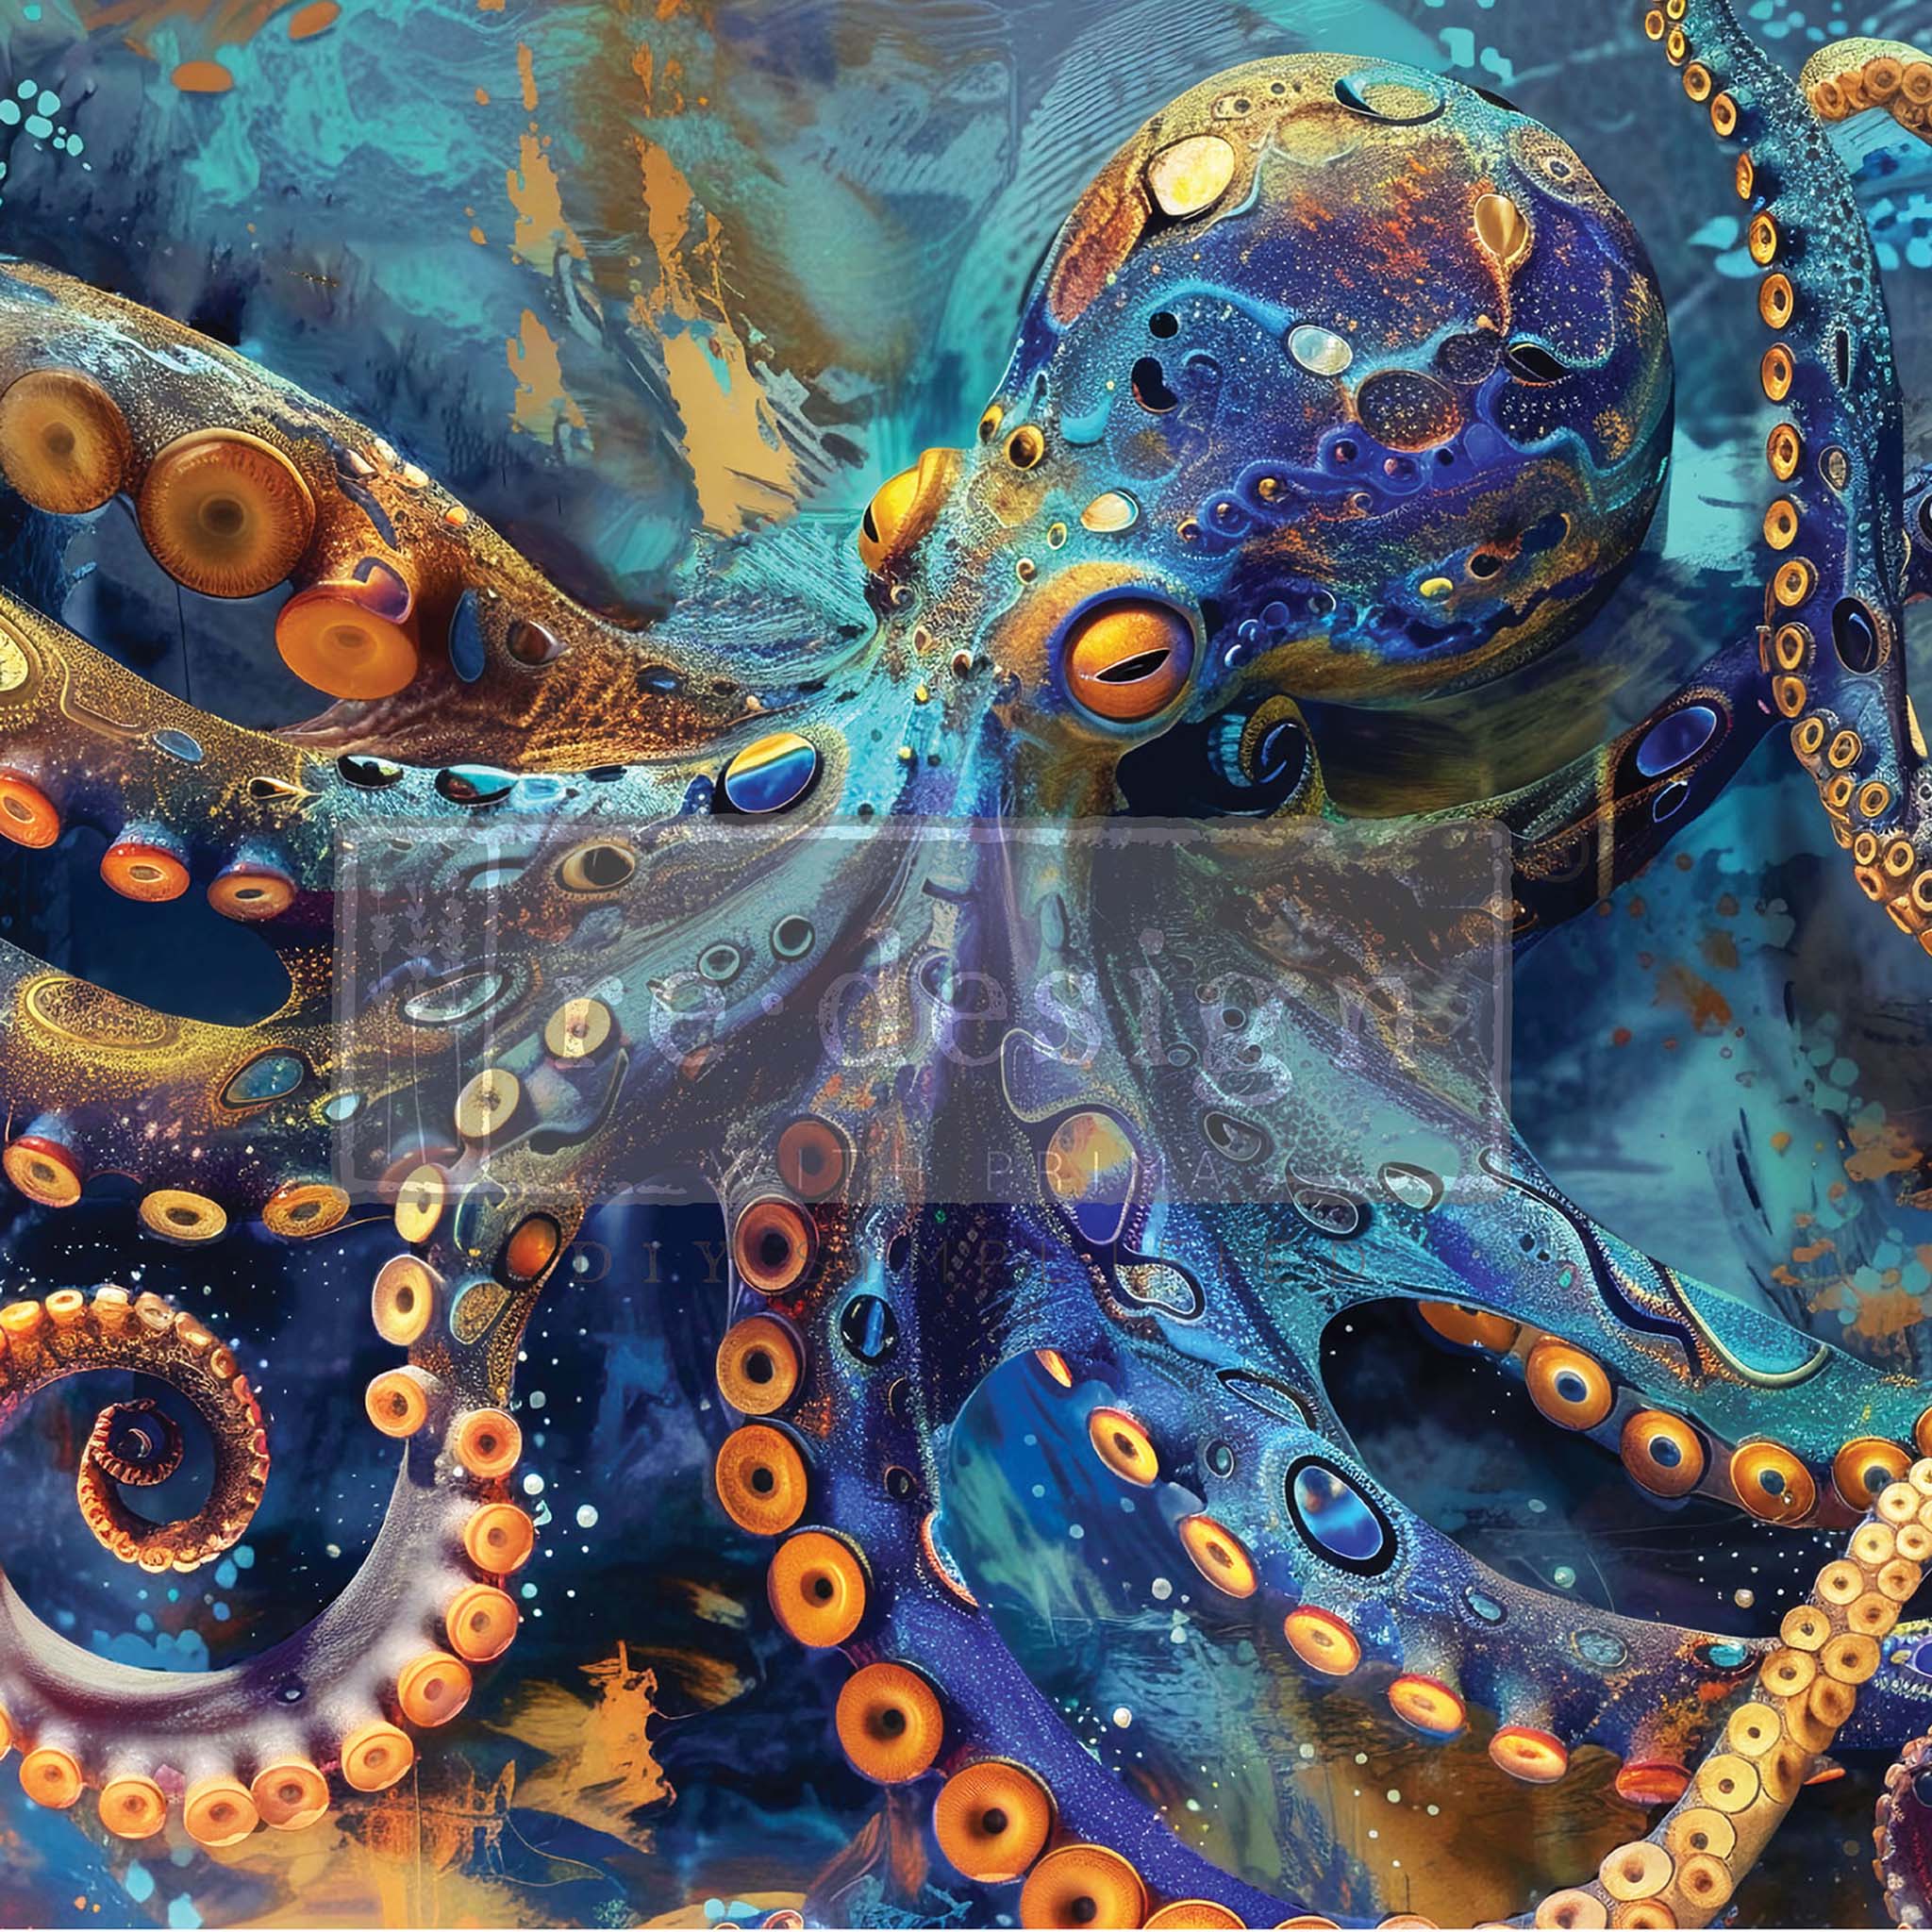 Close-up of an A1 fiber tissue paper featuring a bold colored octopus adorned with steampunk cogs and gears.